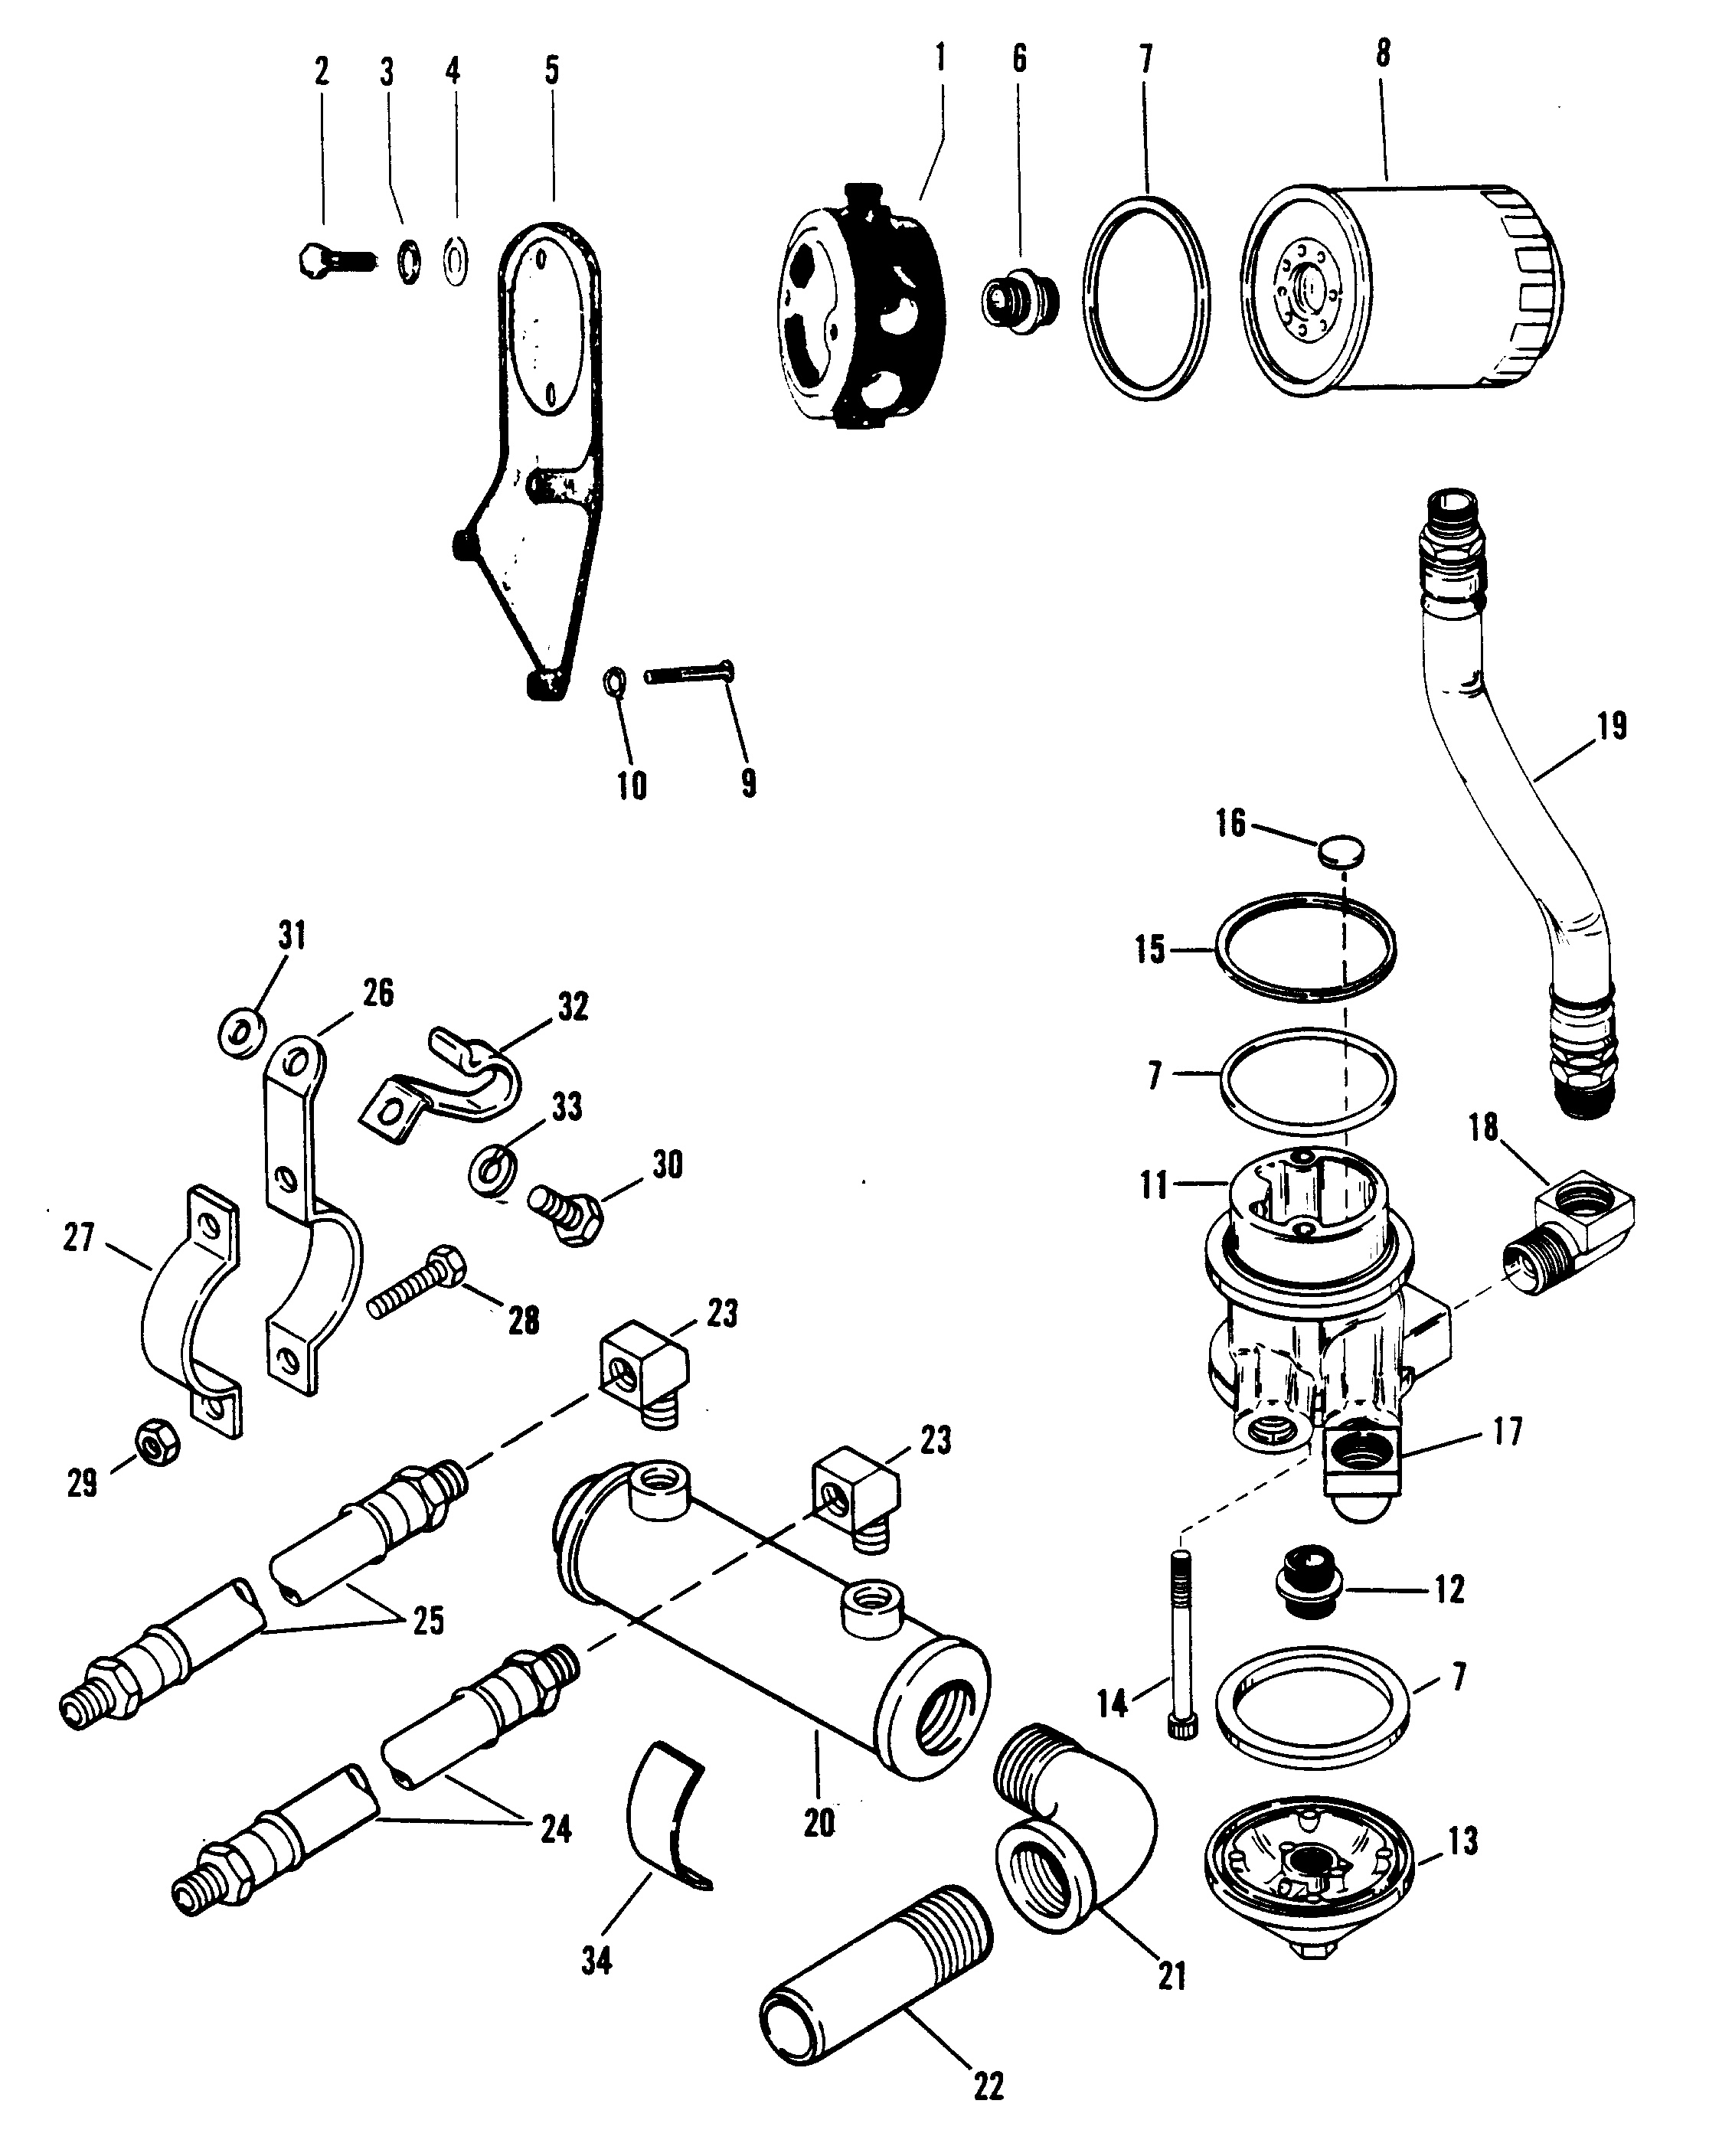 OIL COOLER, OIL FILTER AND ADAPTOR